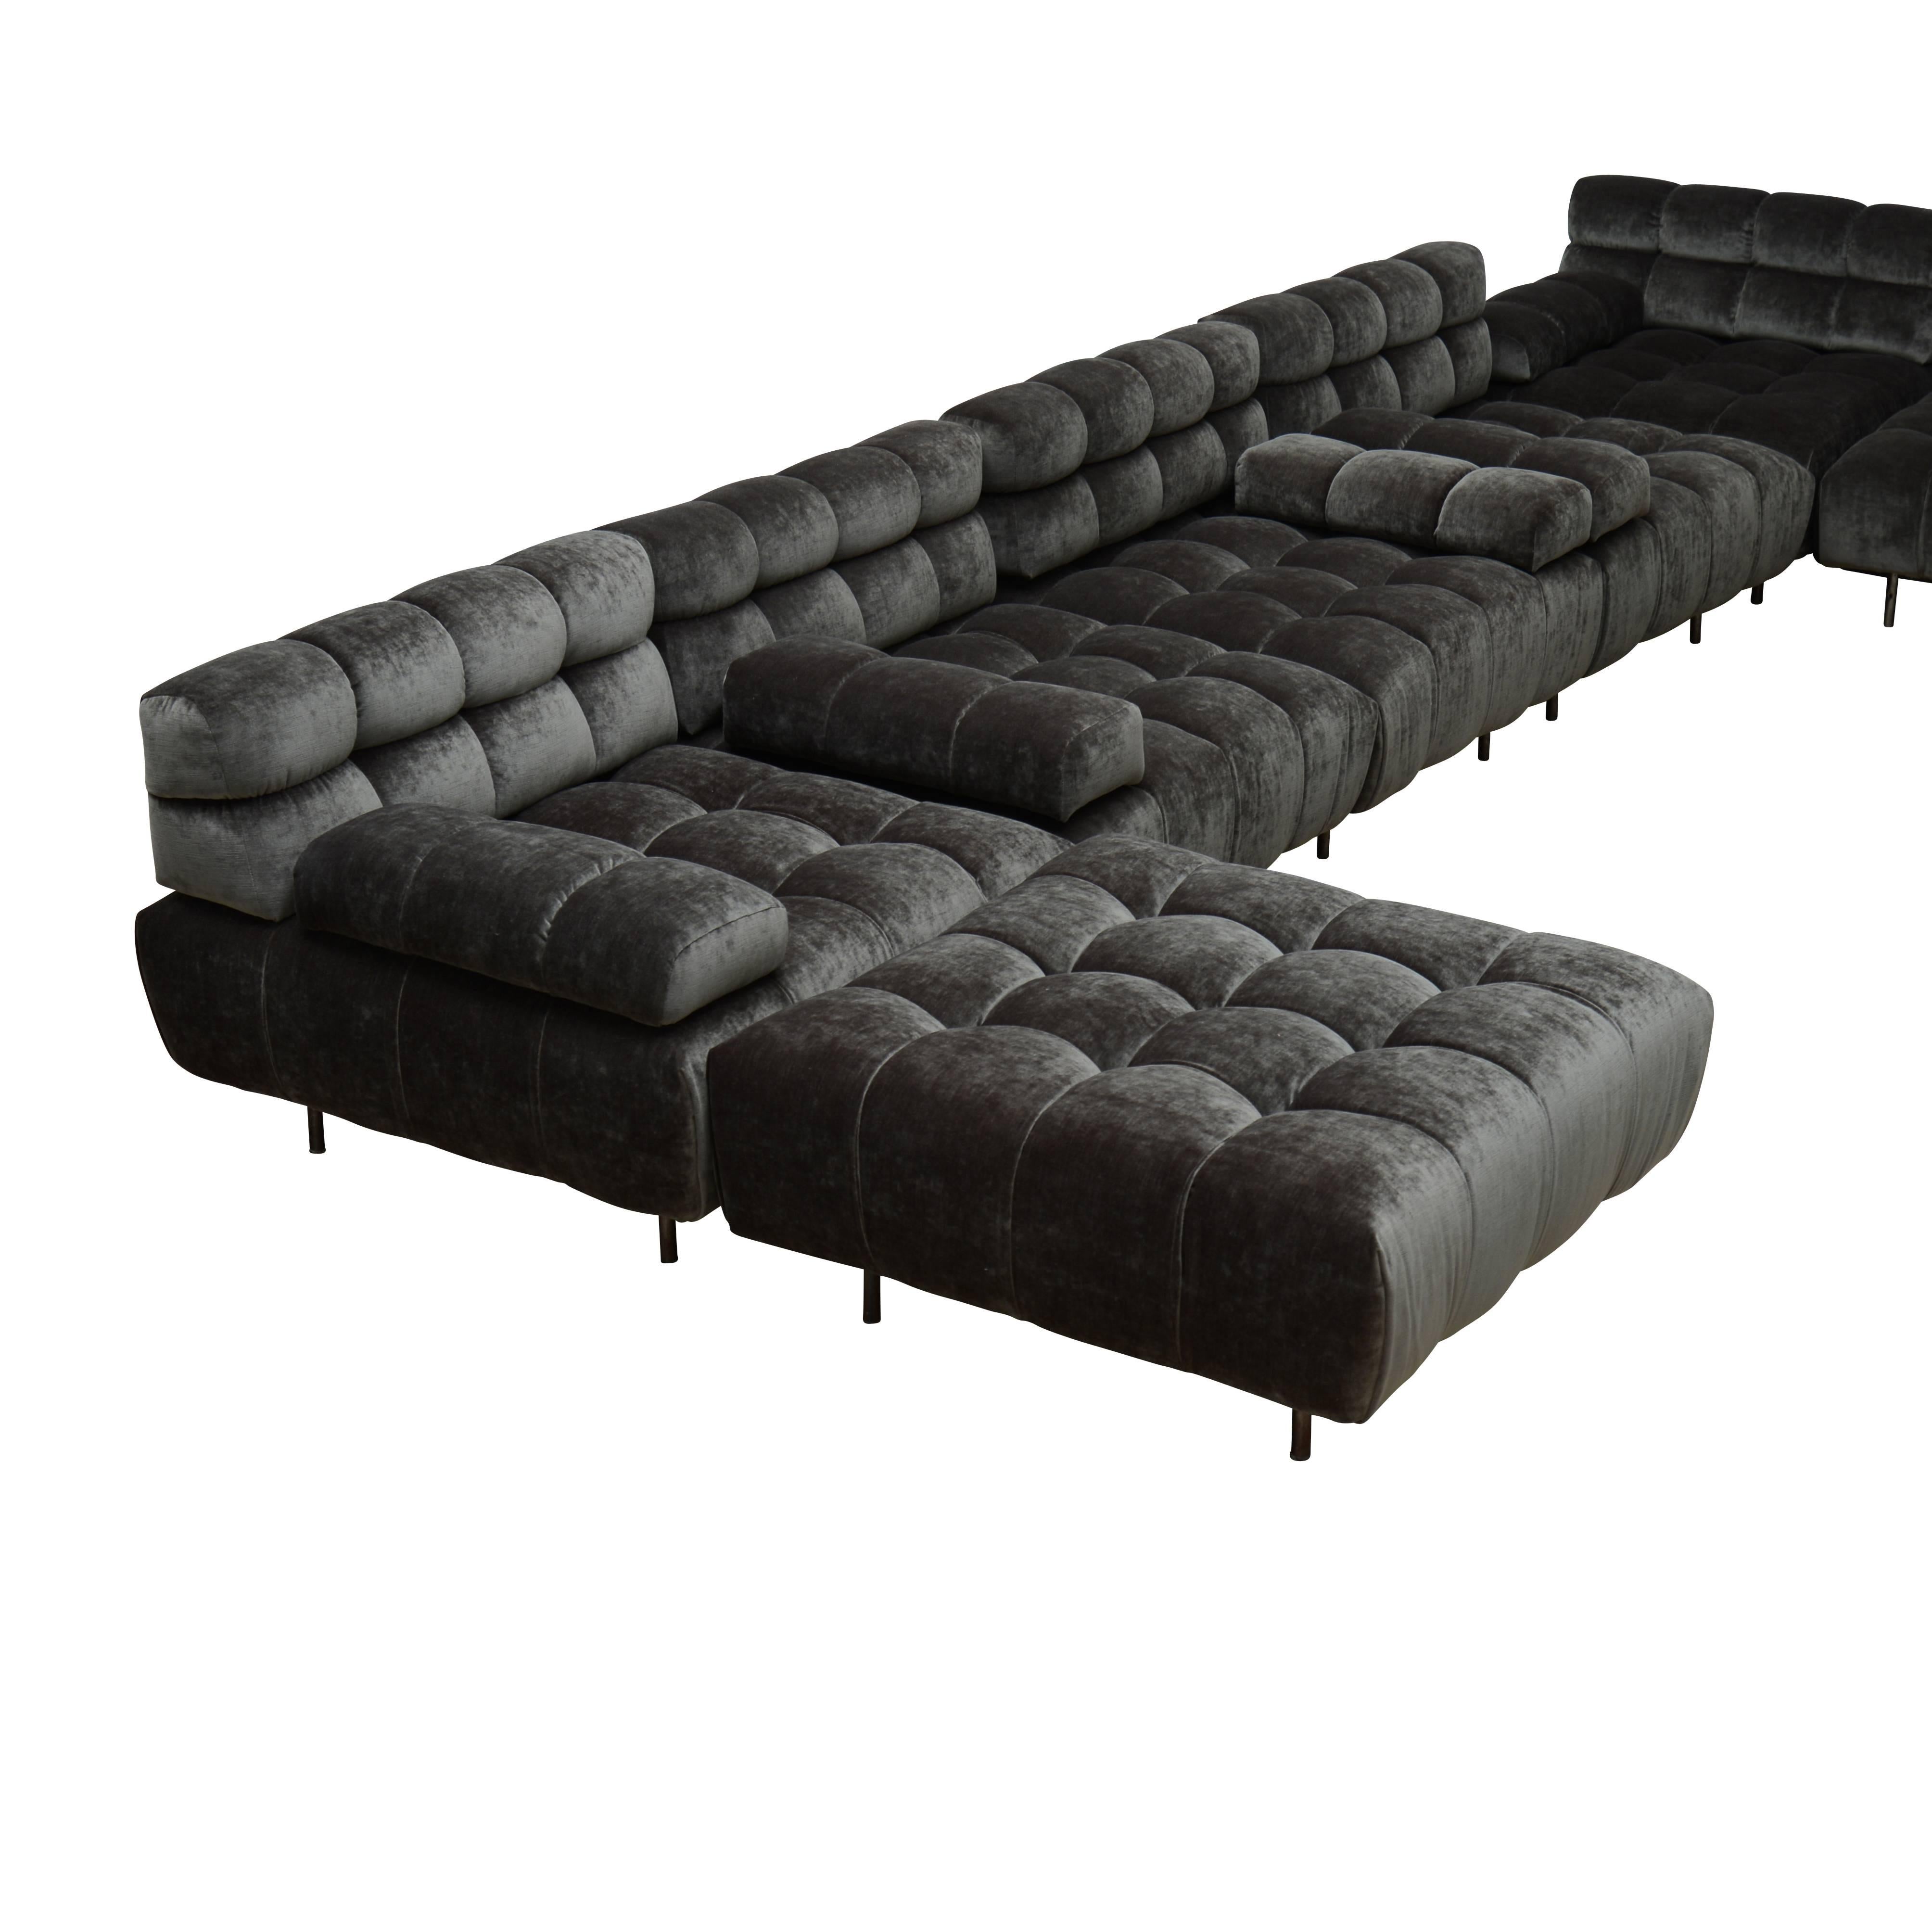 Twelve section modular sofa upholstered in grey linen velvet. Seven arm, two armless, three ottoman.

Each section: 33" W x 33" D x 26" H, seat height 15", arm height 20".